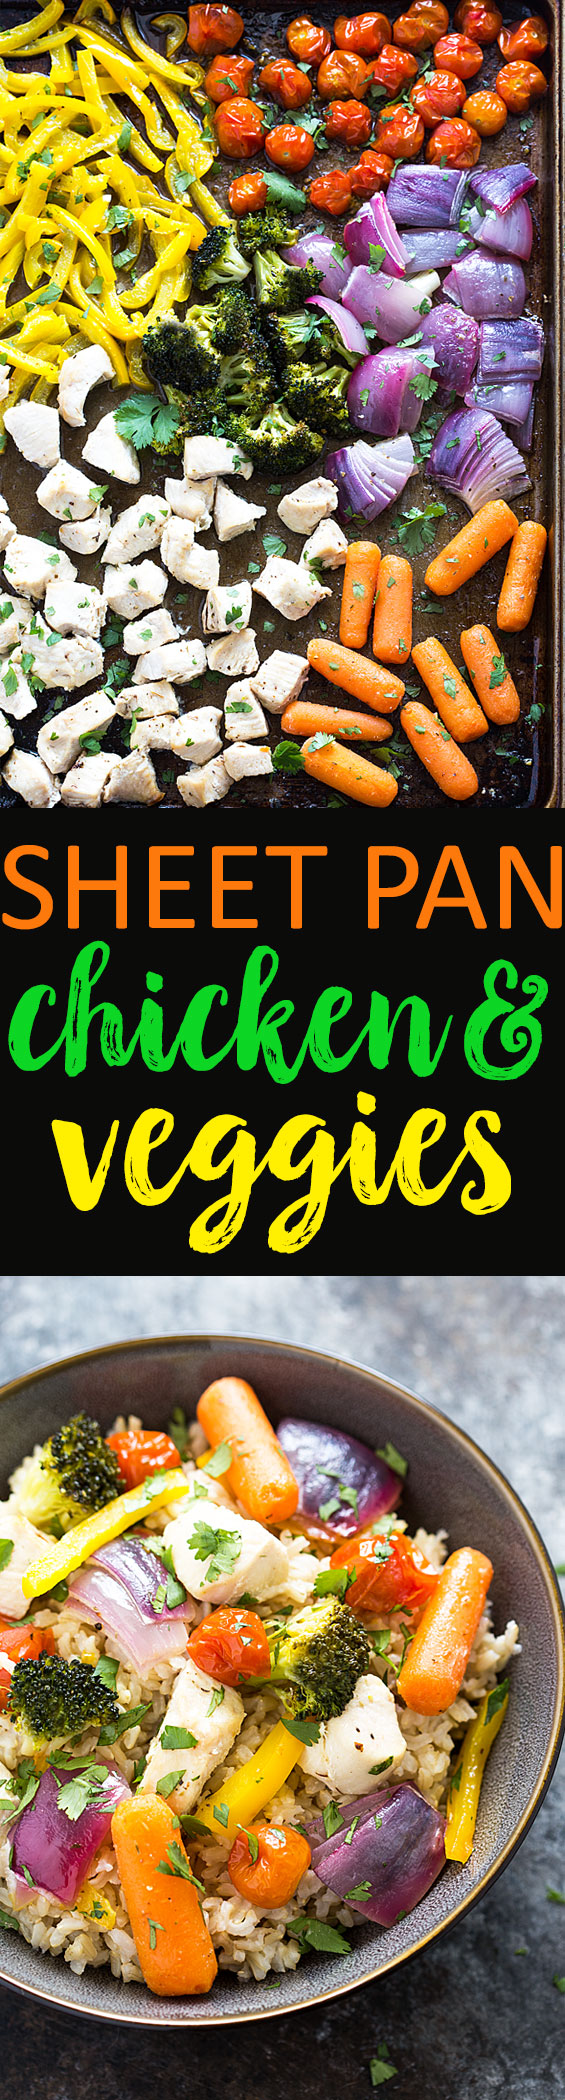 Two images: chicken and vegetables in a sheet pan and in a bowl.   